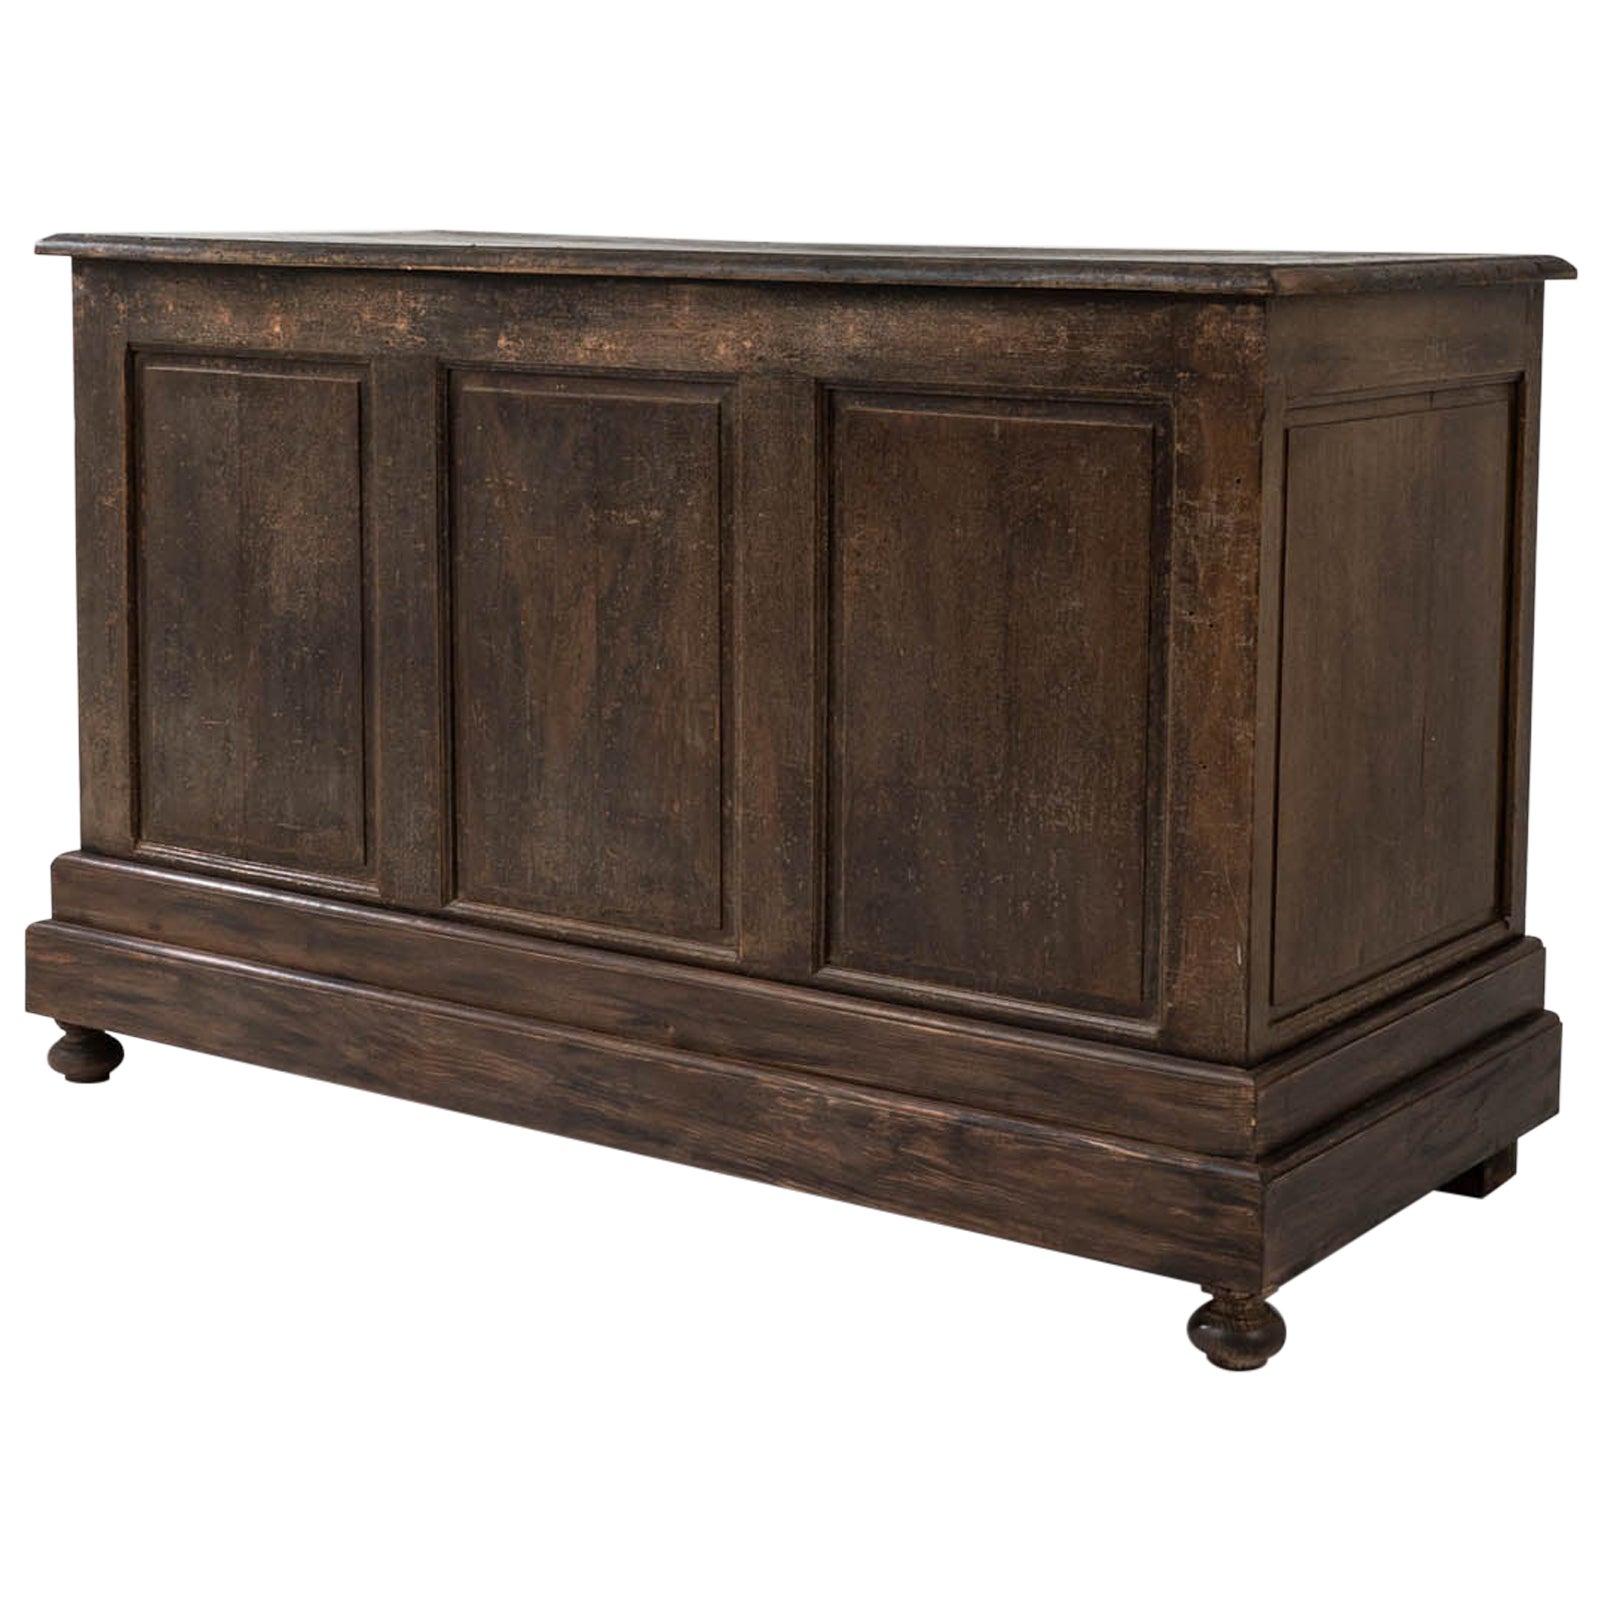 19th Century French Wooden Shop Counter For Sale